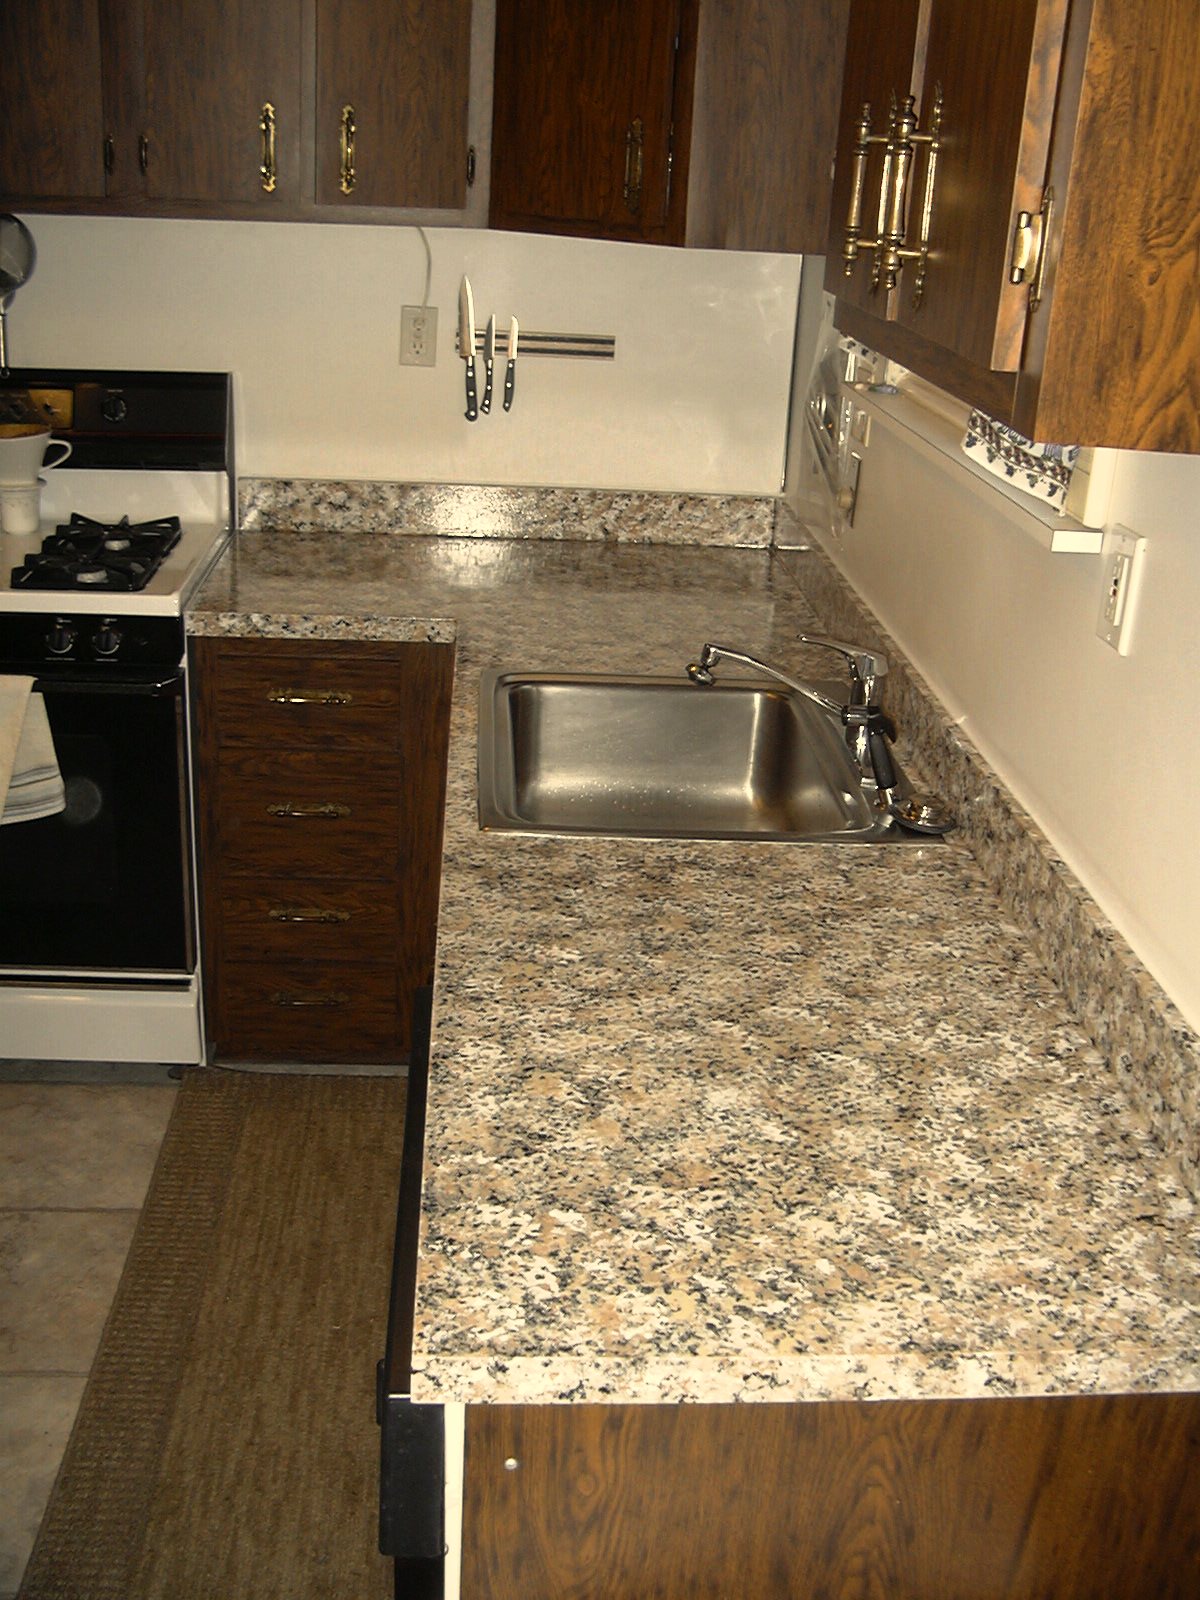 Ken nect Our Experience with the Giani Granite Countertop Paint Kit